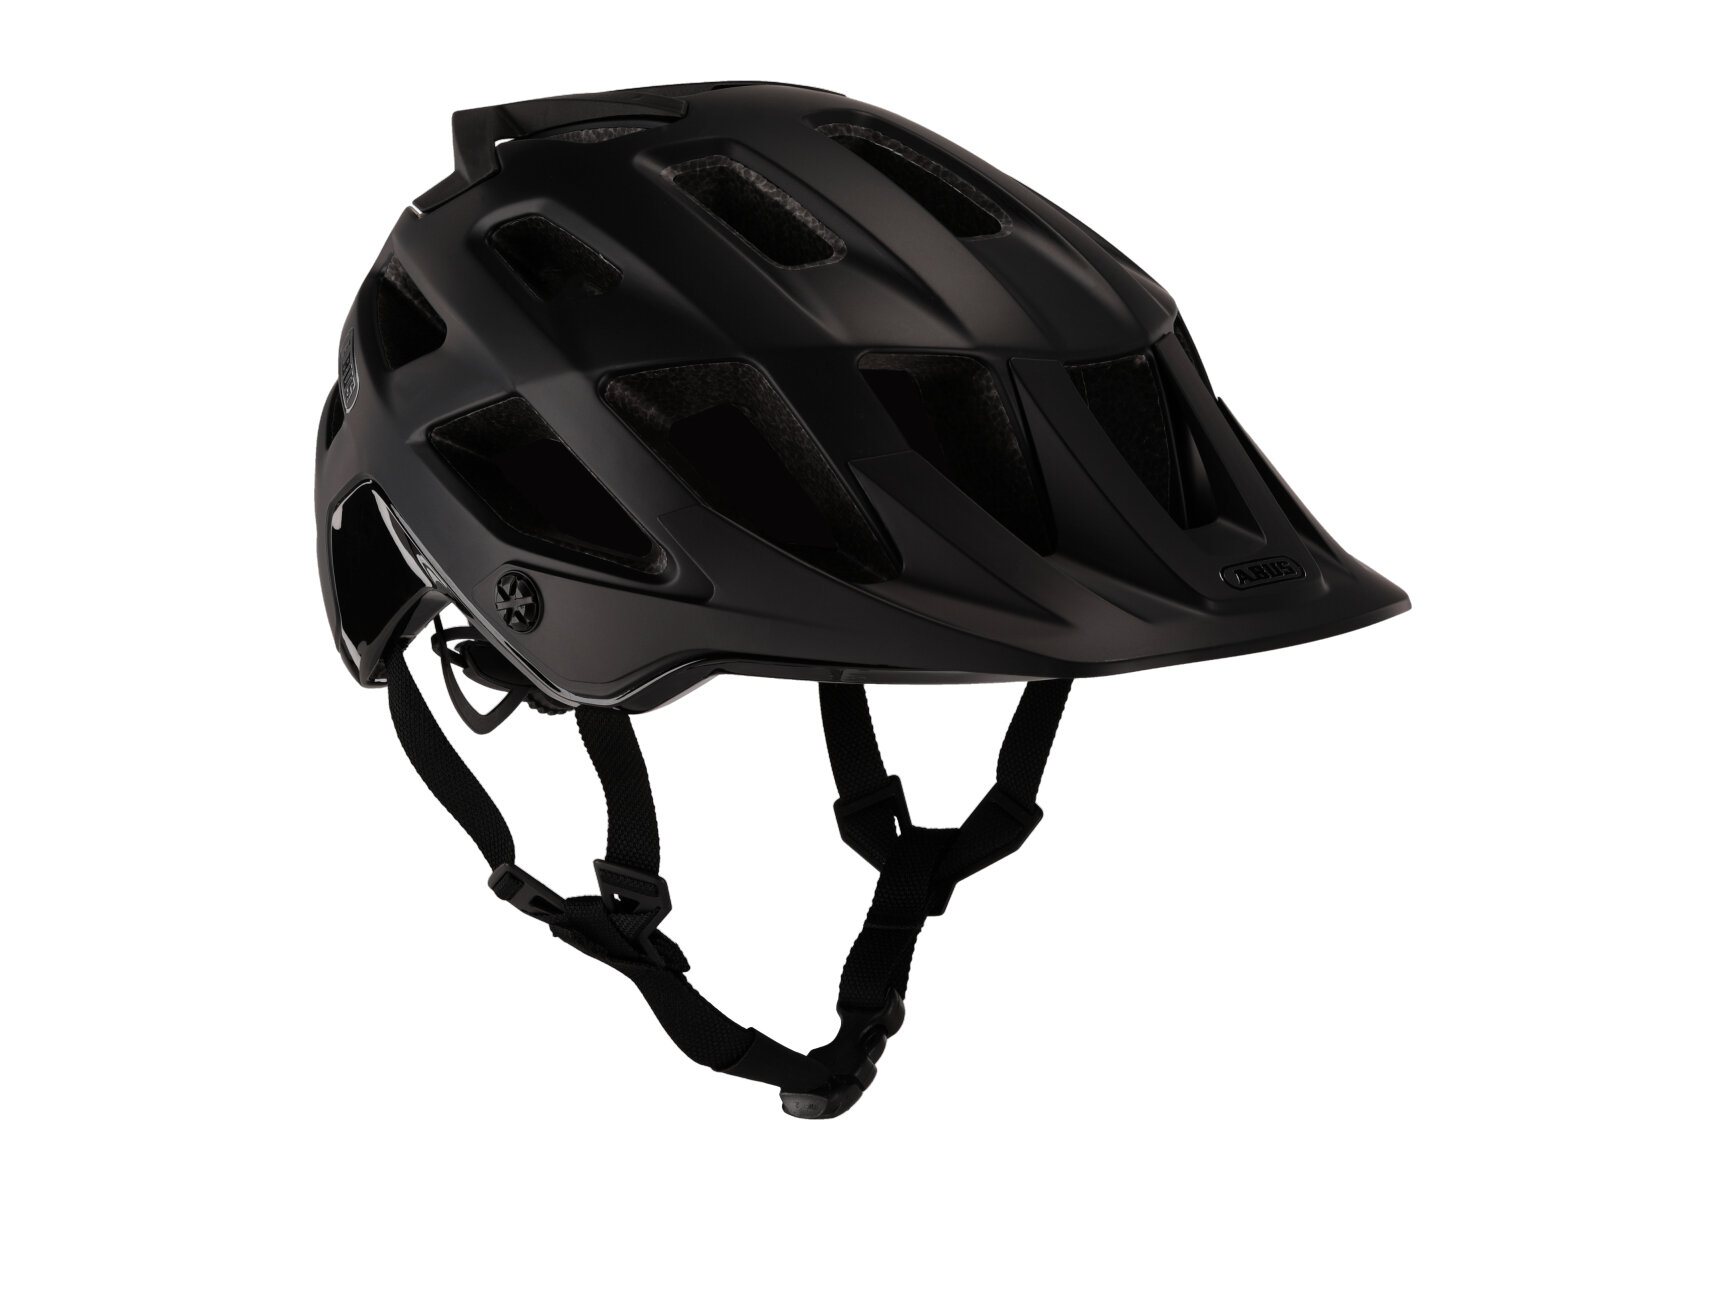 Kask rowerowy ABUS MOVENTOR 2.0